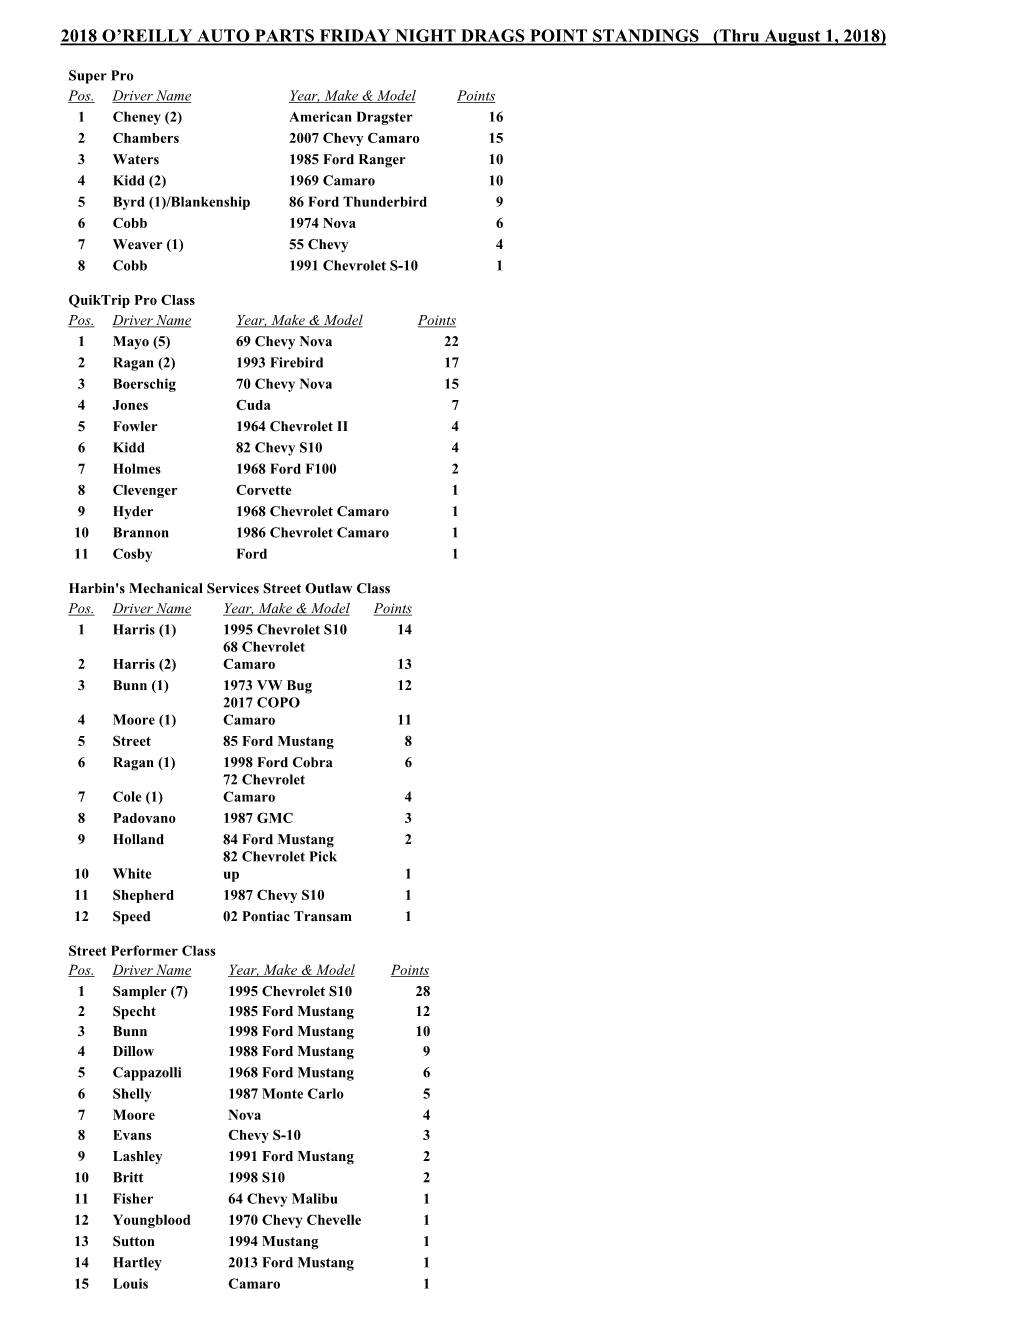 2018 O'reilly AUTO PARTS FRIDAY NIGHT DRAGS POINT STANDINGS (Thru August 1, 2018)